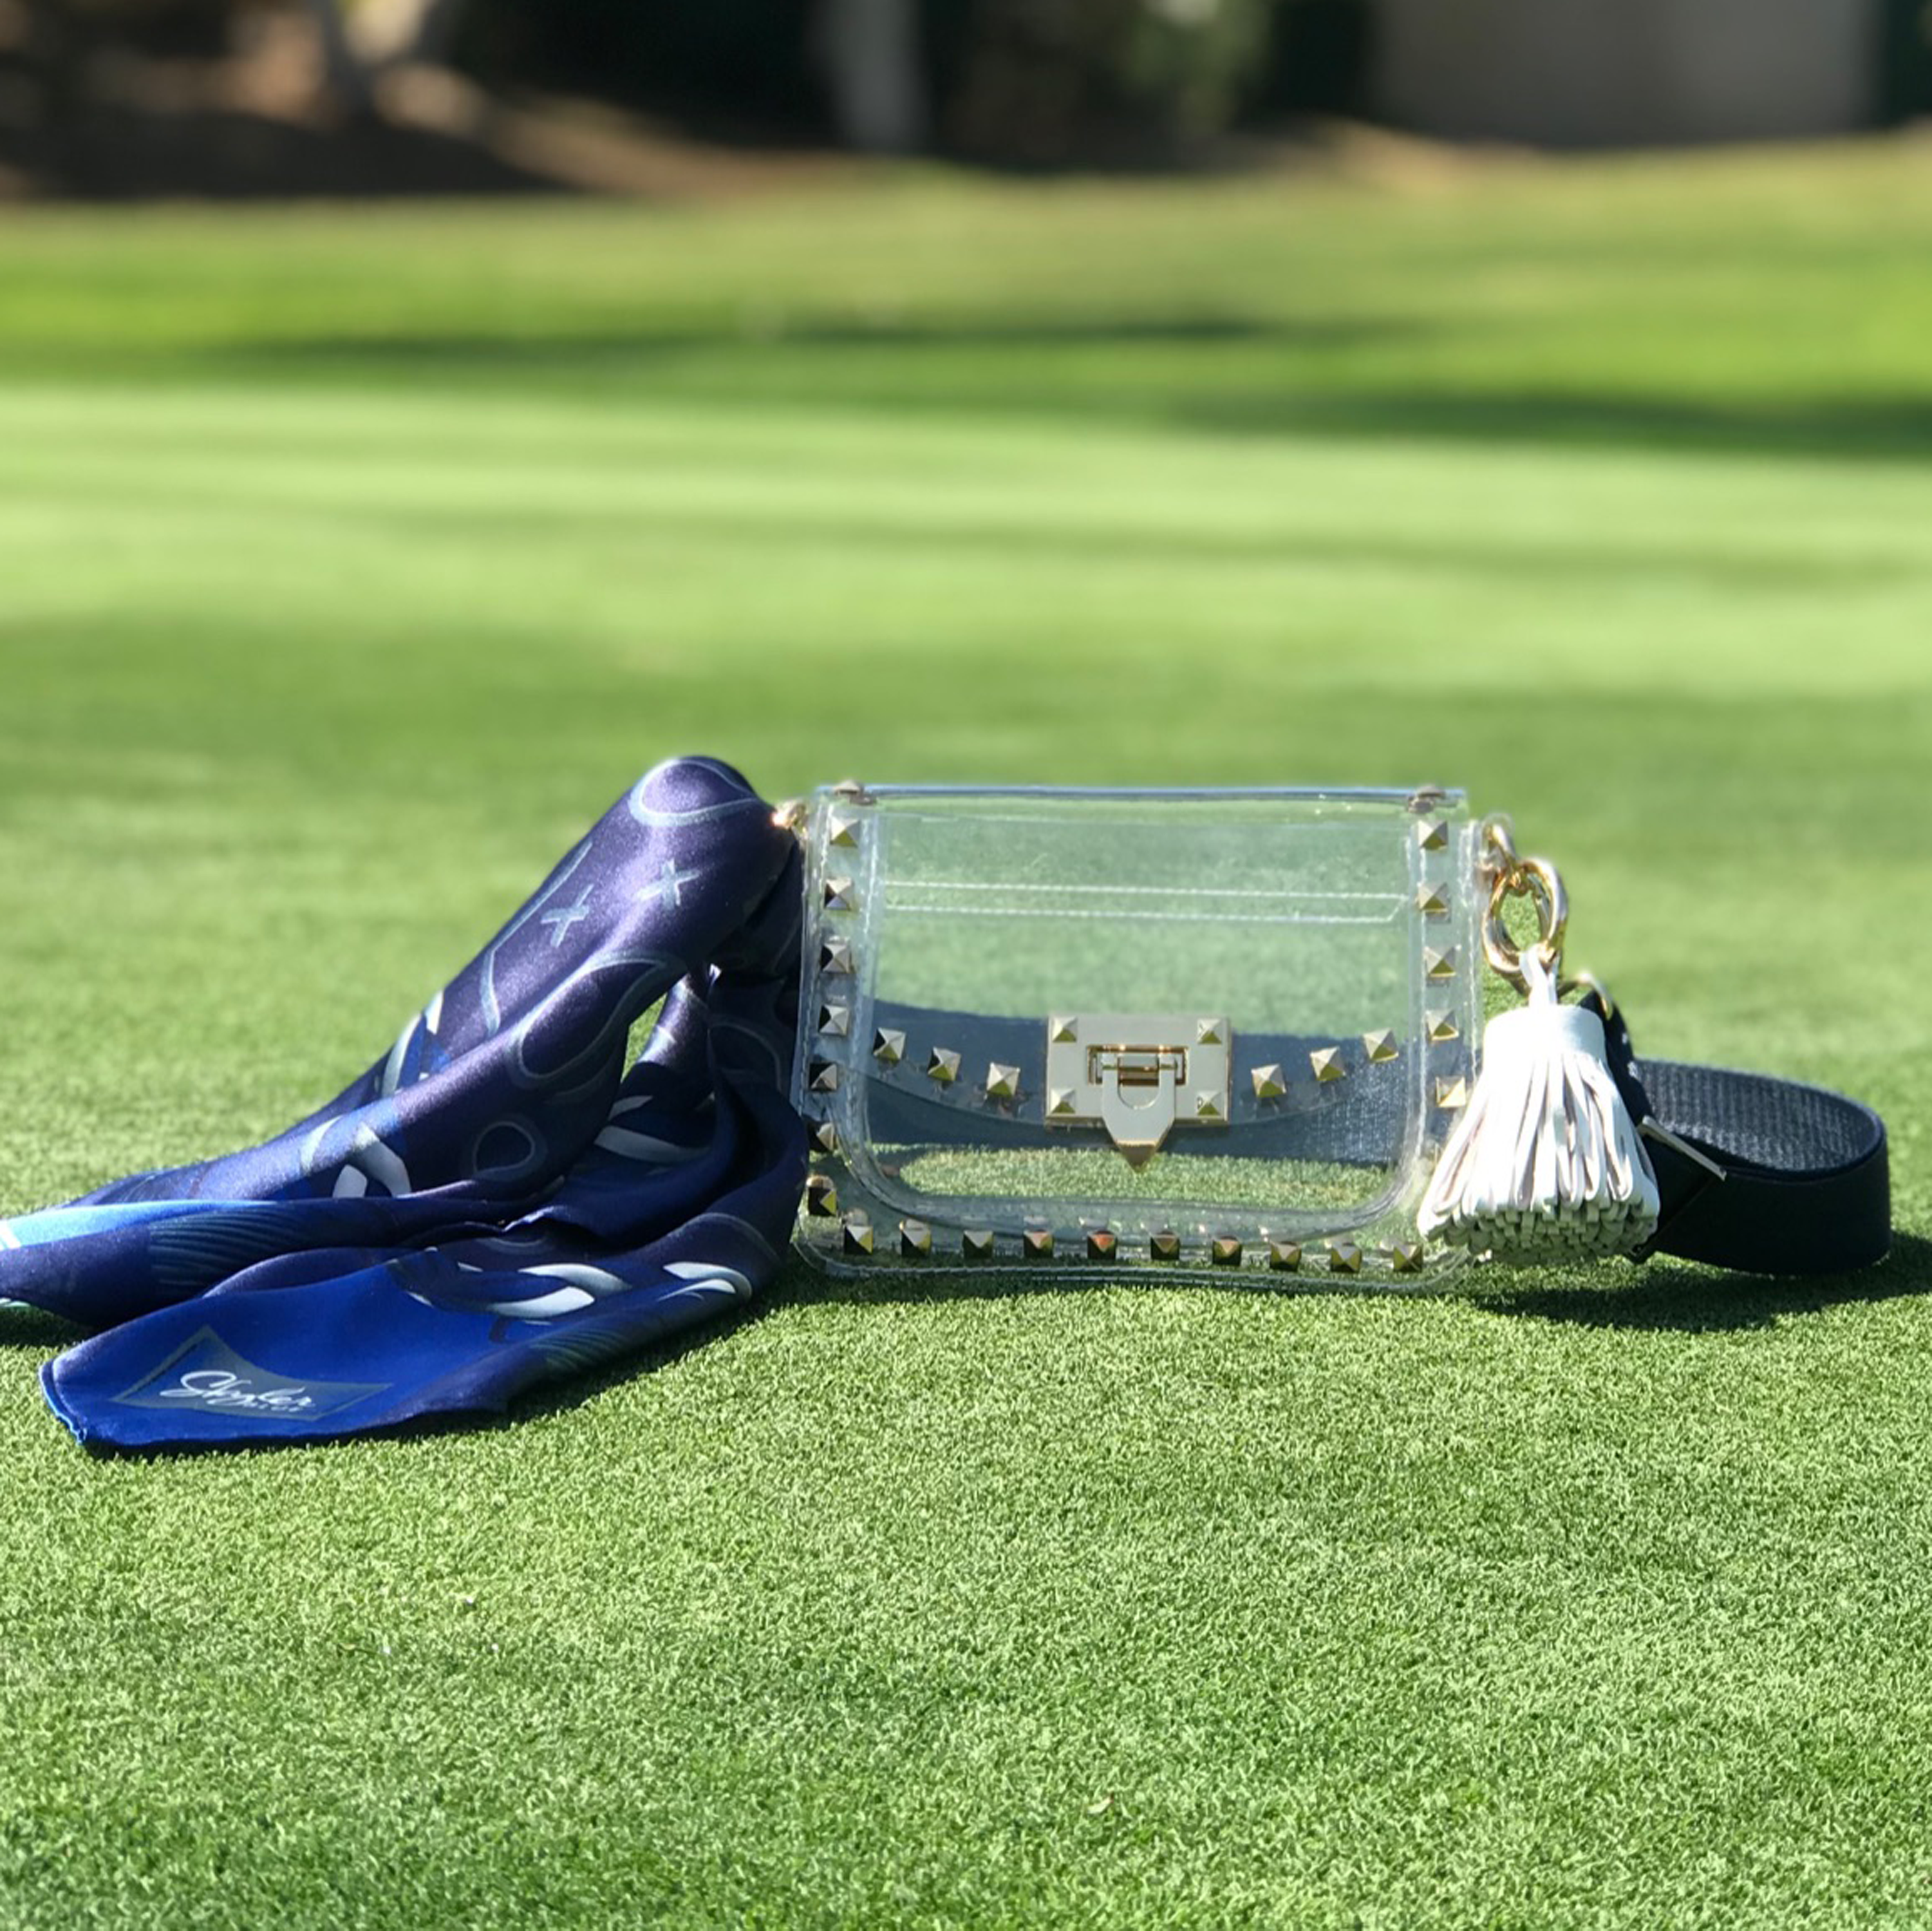 Skyler Blue’s The Dallas 001 Small Studded Clear Bag stadium approved clear bag / clear purse including adjustable, nylon webbing shoulder or crossbody strap with herringbone weave and gold hardware, 60-centimeter 100% silk twill scarf, and 100% genuine leather tassel. 